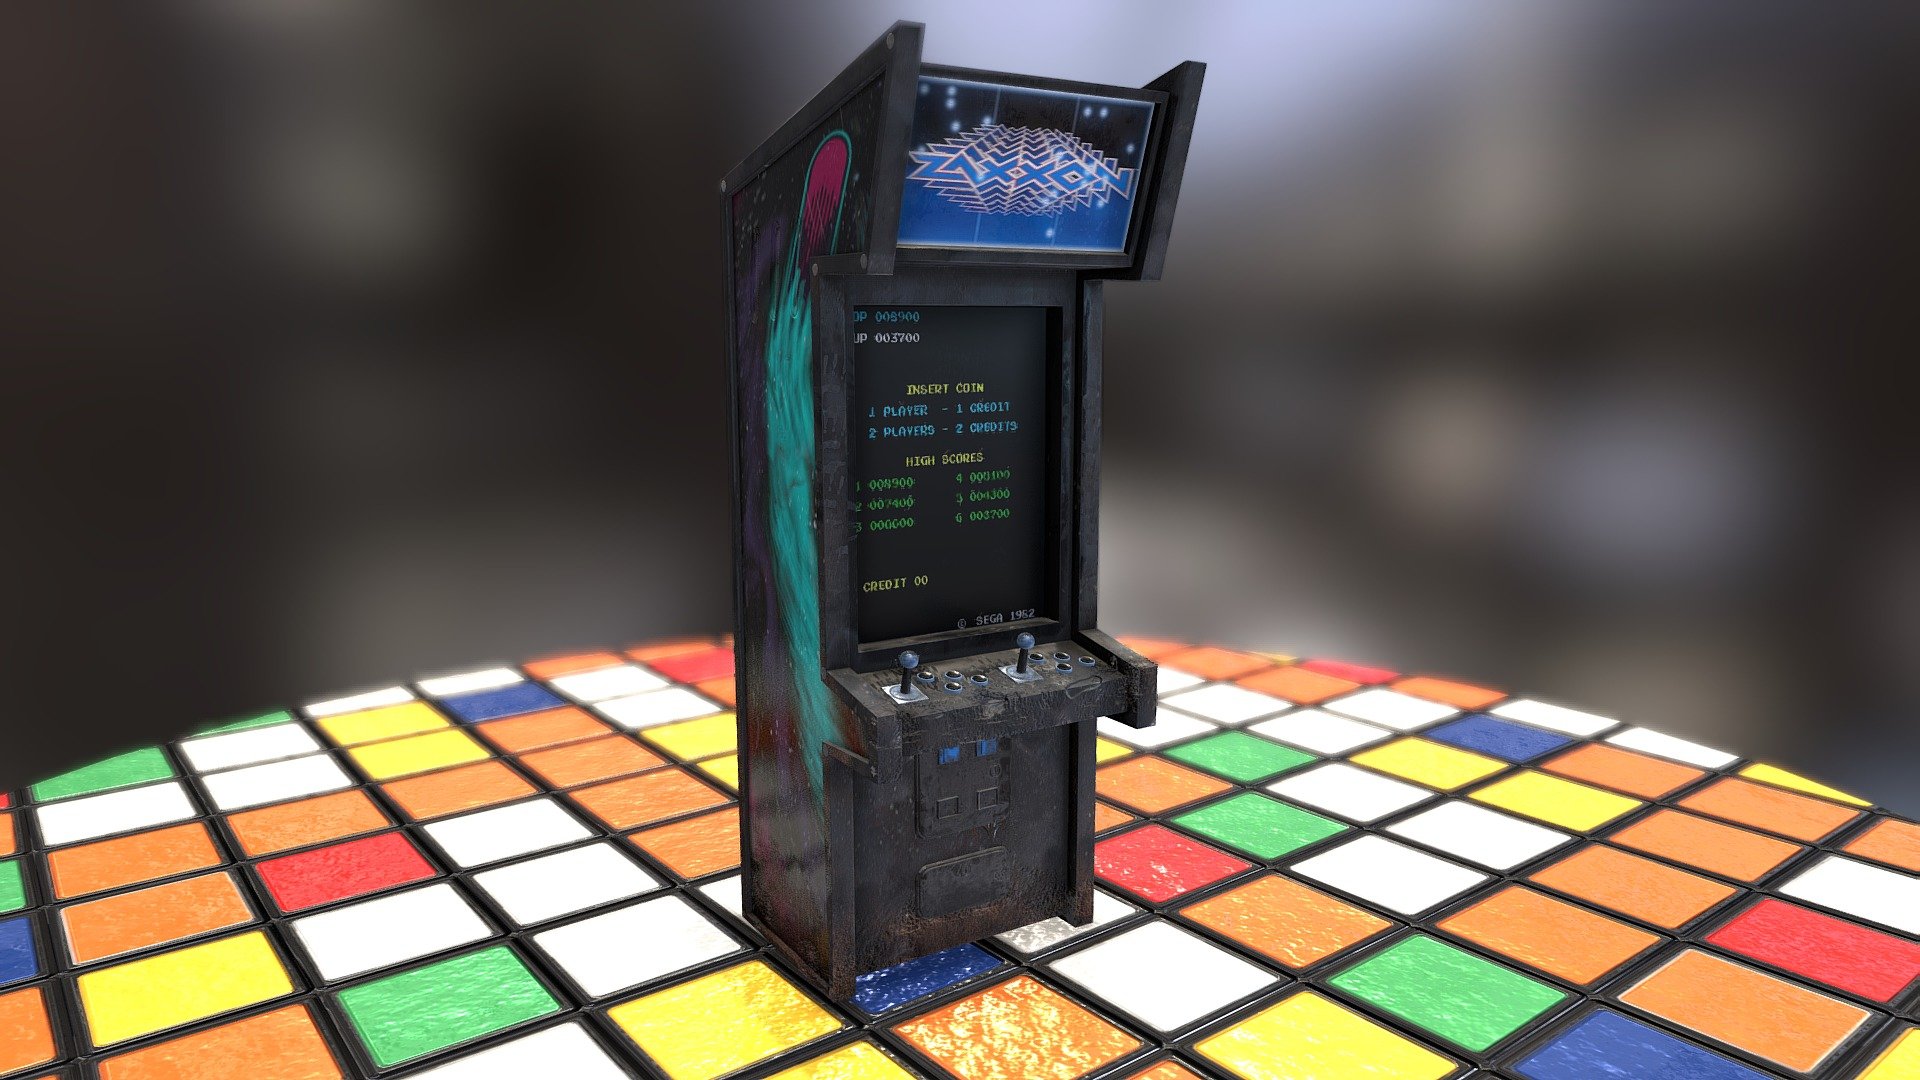 A shabby arcade machine.
Modelled in Blander, textured in Substance painter.
texture  box 2k, paraphernalia 512, floor 2k 
Triangles 3.660

Zaxxon is an isometric scrolling shoot-em-up in which the player pilots an armed spaceship and must penetrate heavily-fortified enemy bases - Zaxxon shabby Arcade Machine - 3D model by aero1515 3d model